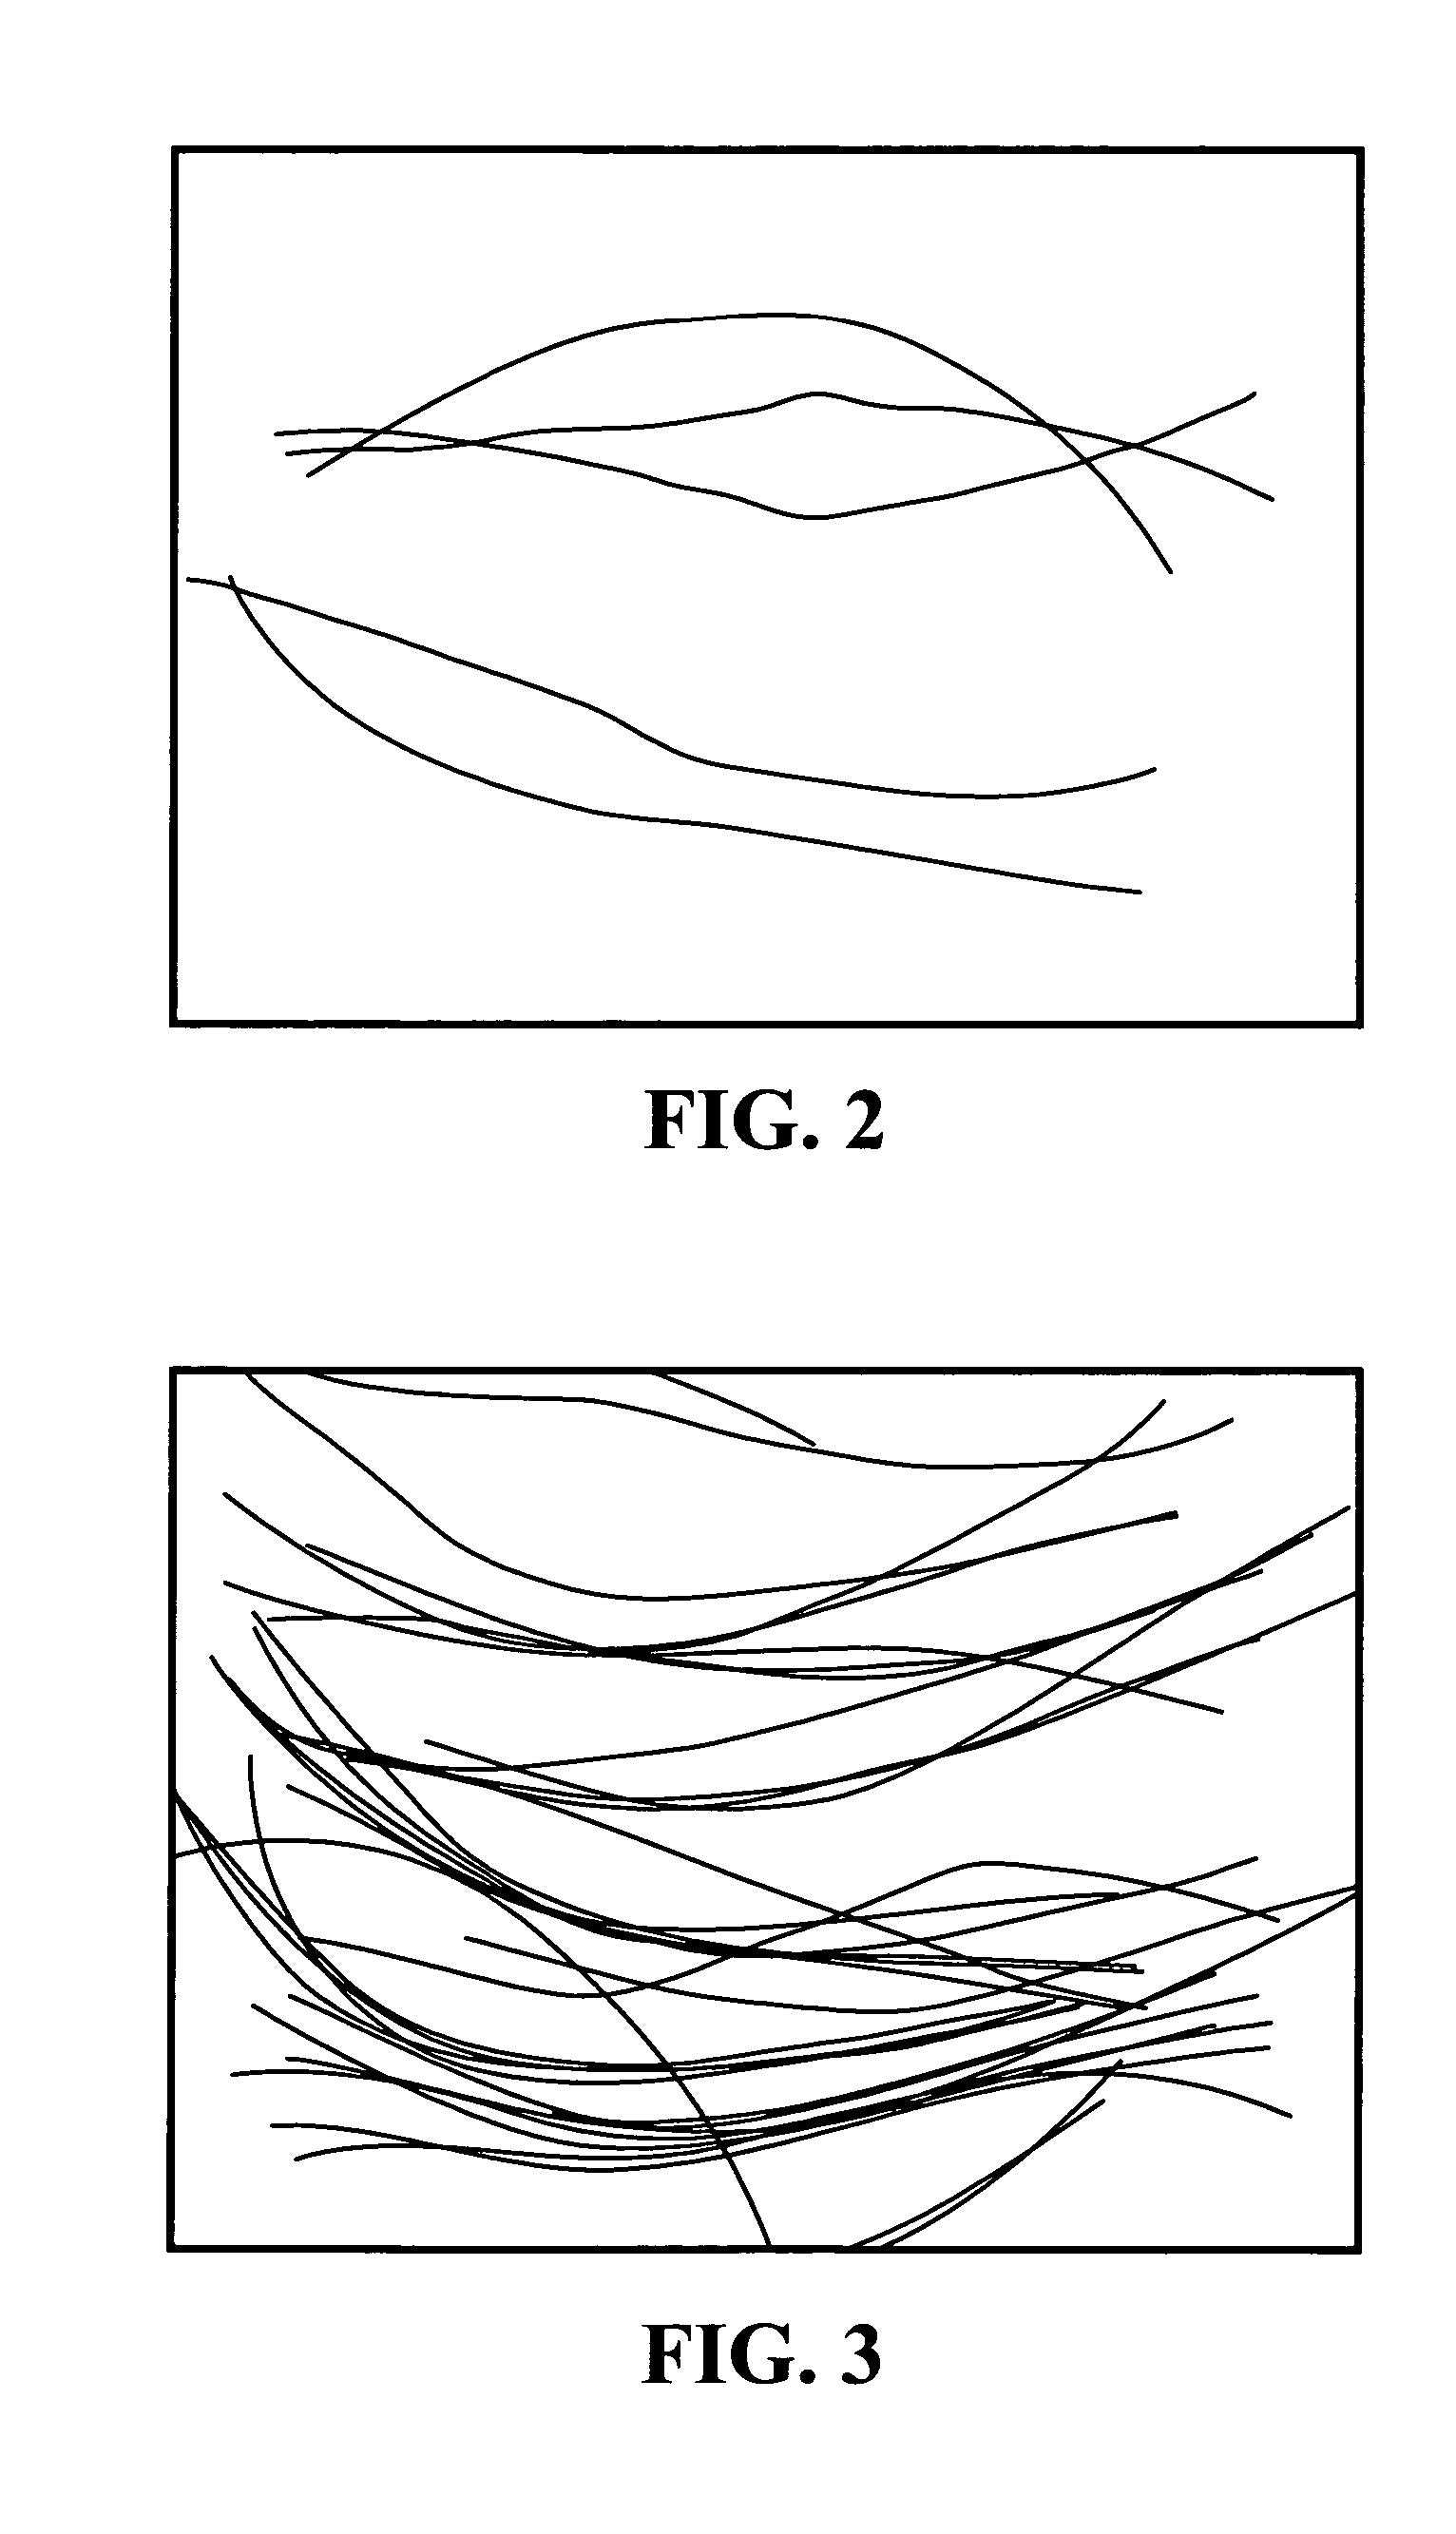 Blended mulch product and method of making same